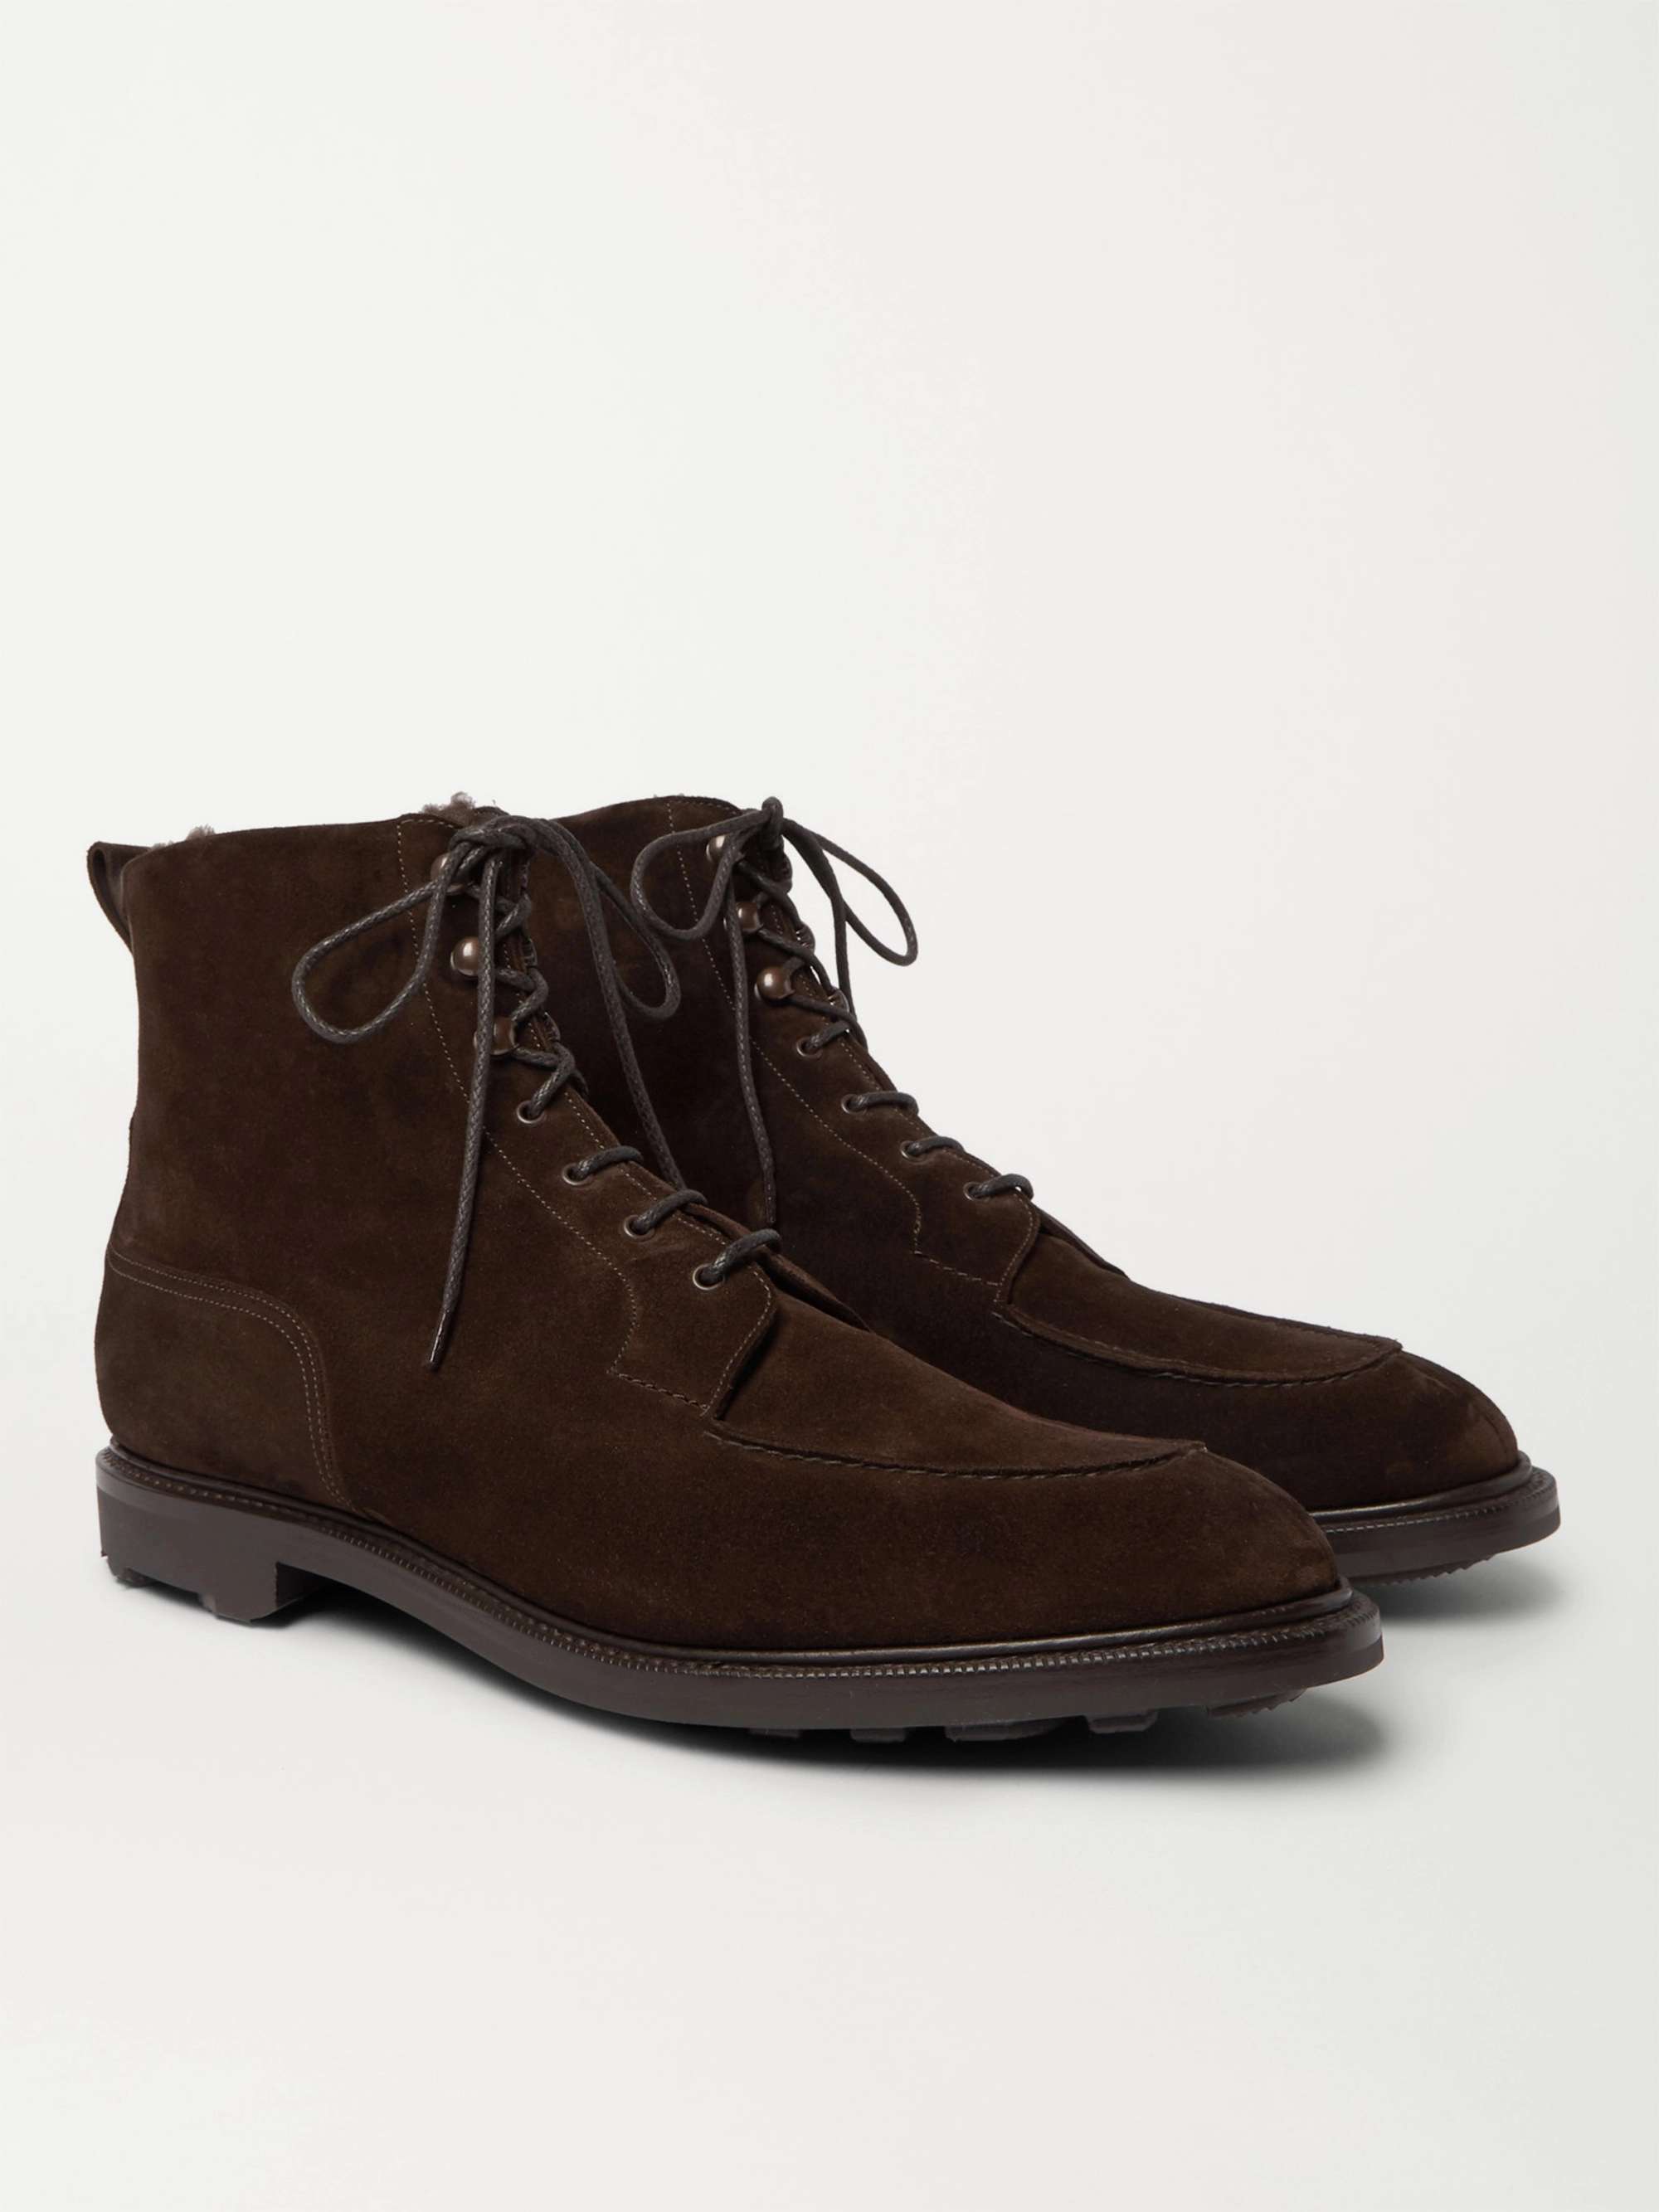 EDWARD GREEN Cranleigh Shearling-Lined Full-Grain Leather Boots